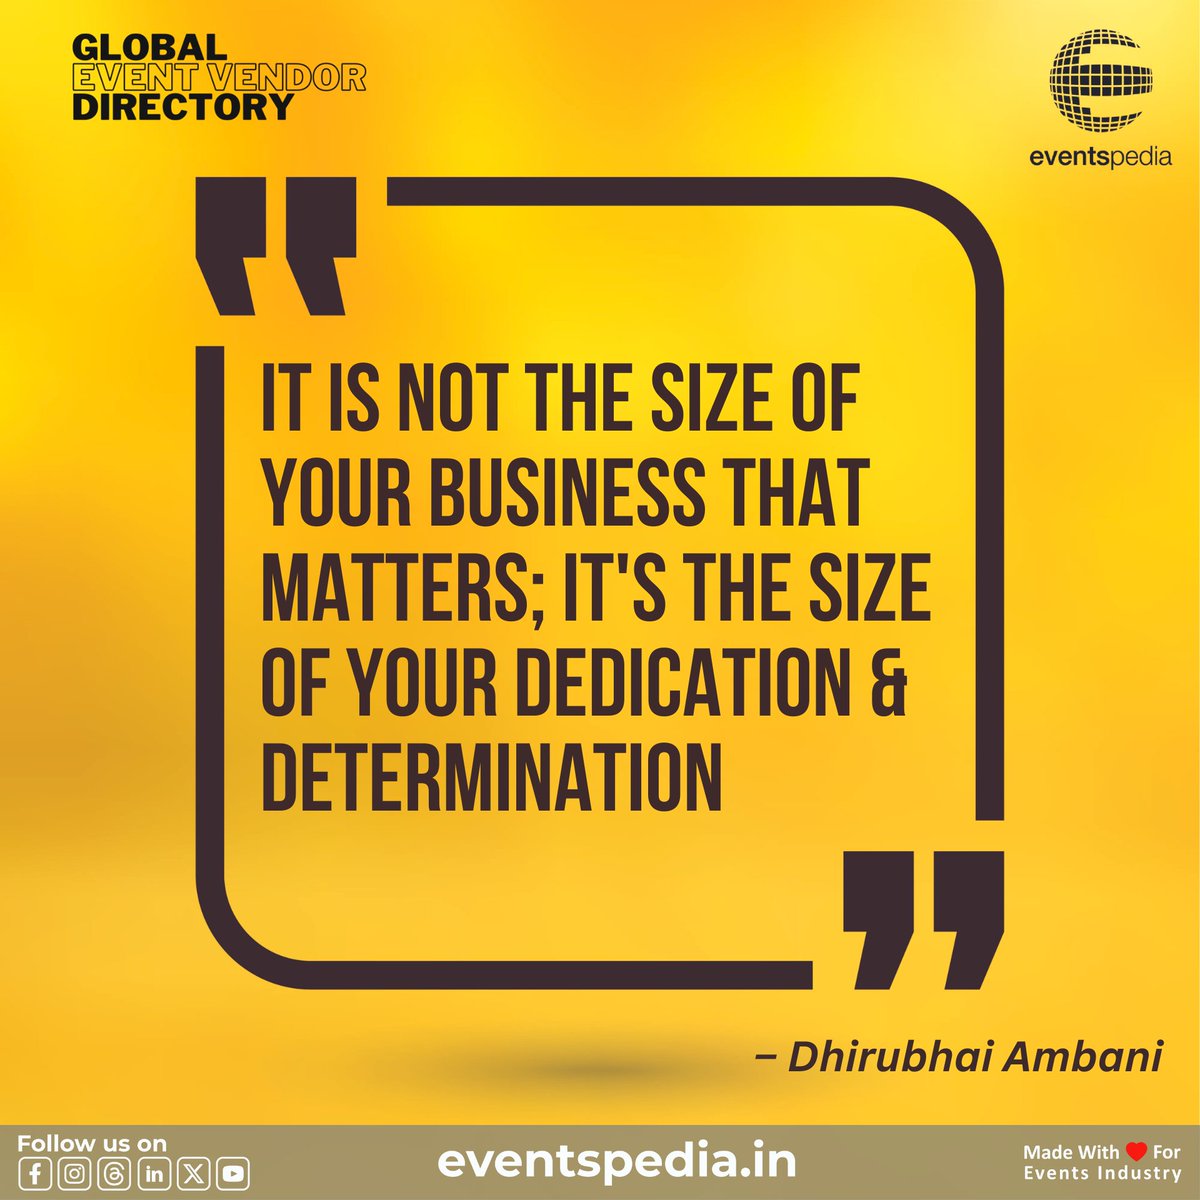 'IT IS NOT THE SIZE OF YOUR BUSINESS THAT MATTERS; IT'S THE SIZE OF YOUR DEDICATION AND DETERMINATION.” – Dhirubhai Ambani.

Your story of triumph begins now. Explore at eventspedia.in 

#motivationalquotes #dhirubhaiambani #ambani #eventspediaindia #eventprofs #global